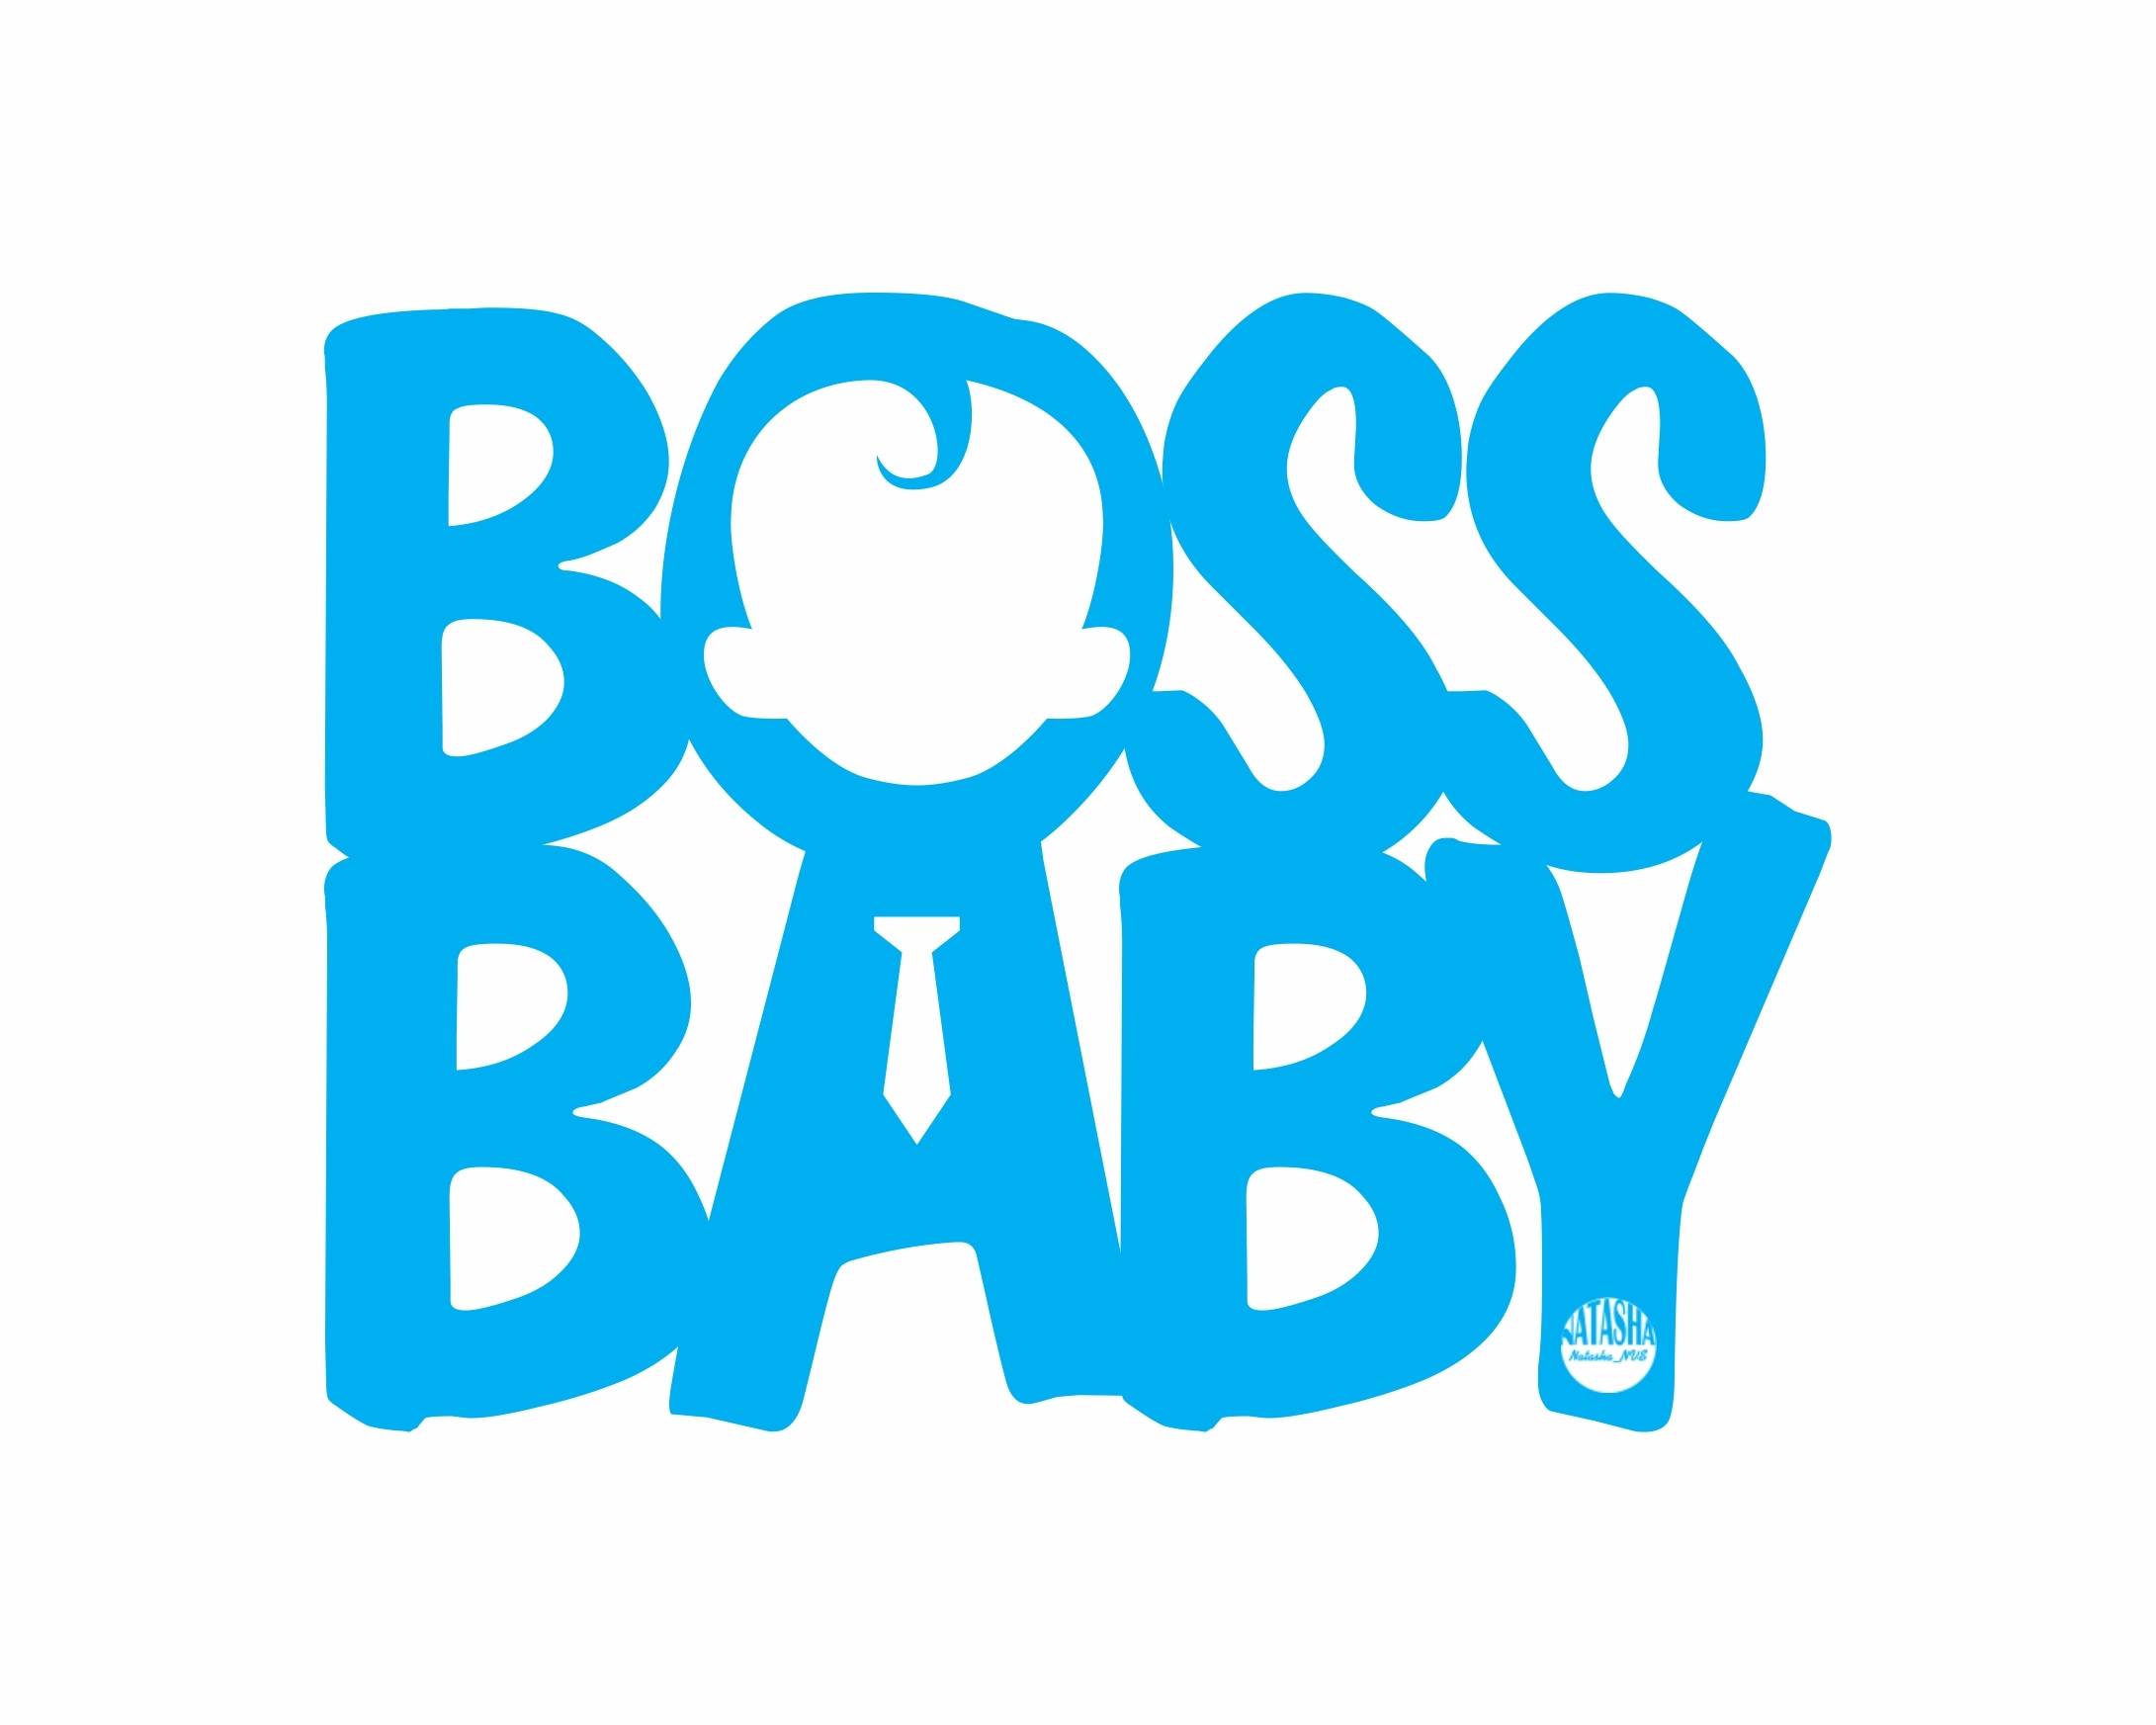 Download The Boss Baby Sticker Free Vector cdr Download - 3axis.co